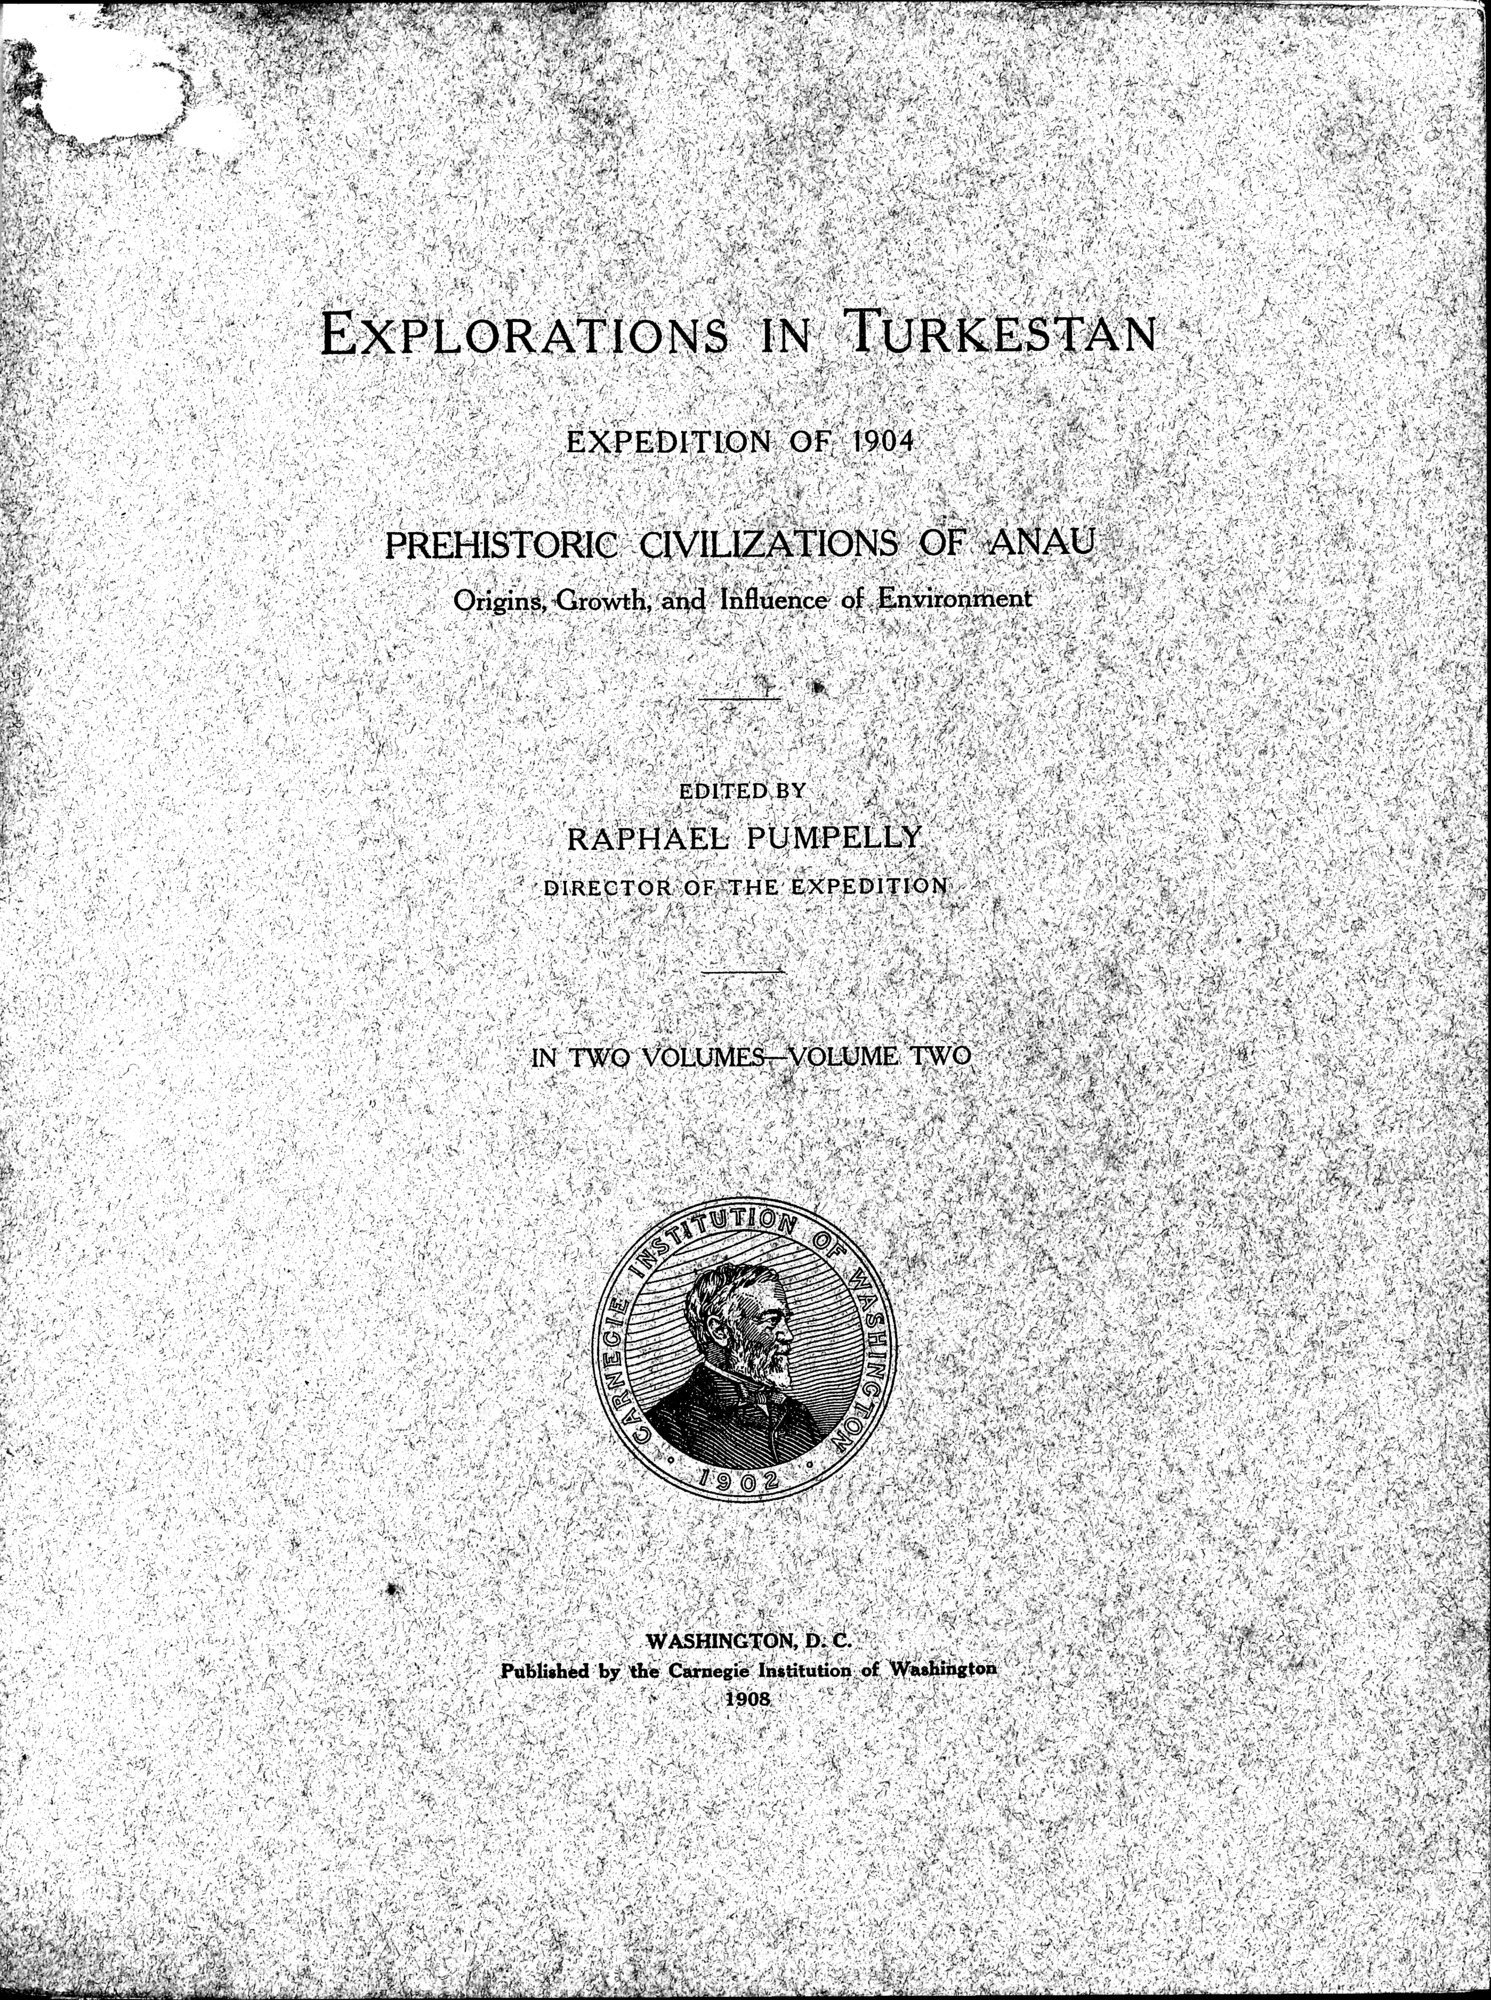 Explorations in Turkestan : Expedition of 1904 : vol.2 / Page 5 (Grayscale High Resolution Image)